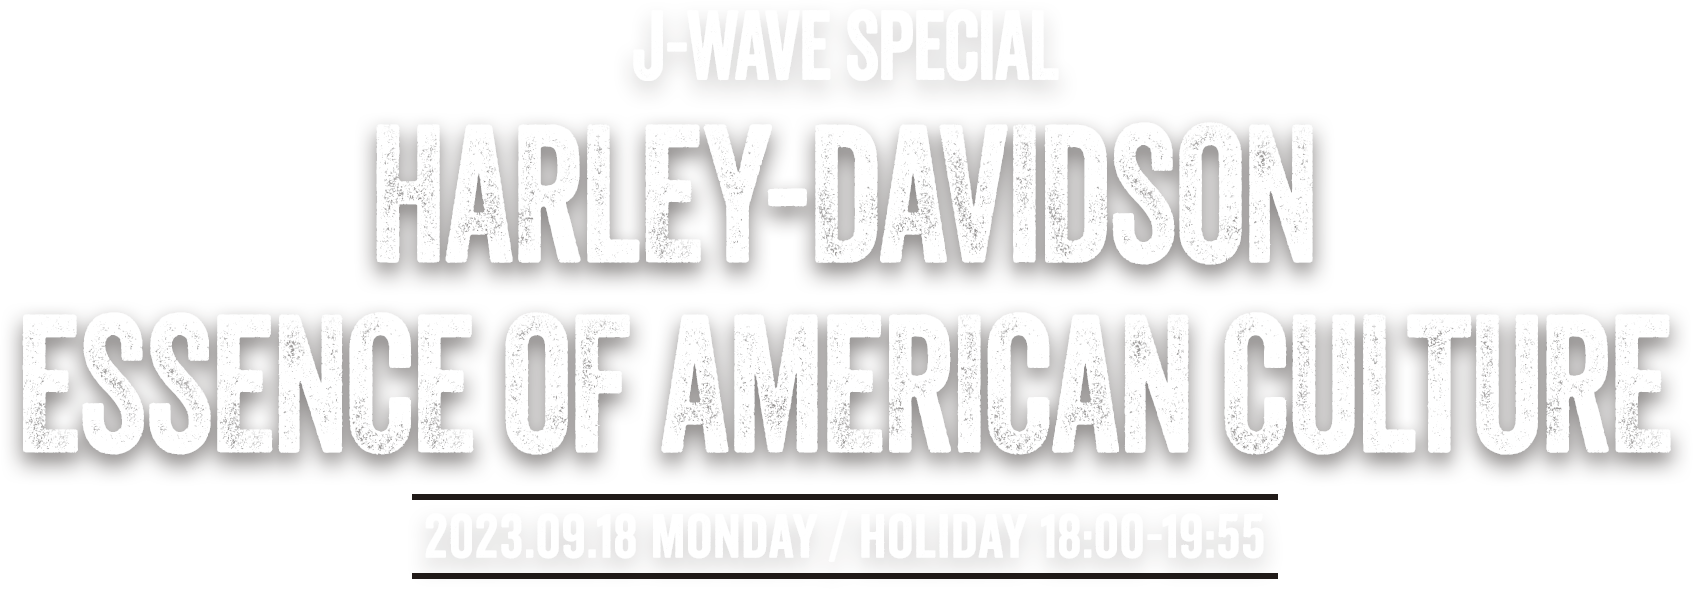 J-WAVE SPECIAL HARLEY-DAVIDSON ESSENCE OF AMERICAN CULTURE | 2023.09.18 MONDAY/HOLIDAY 18:00-19:55